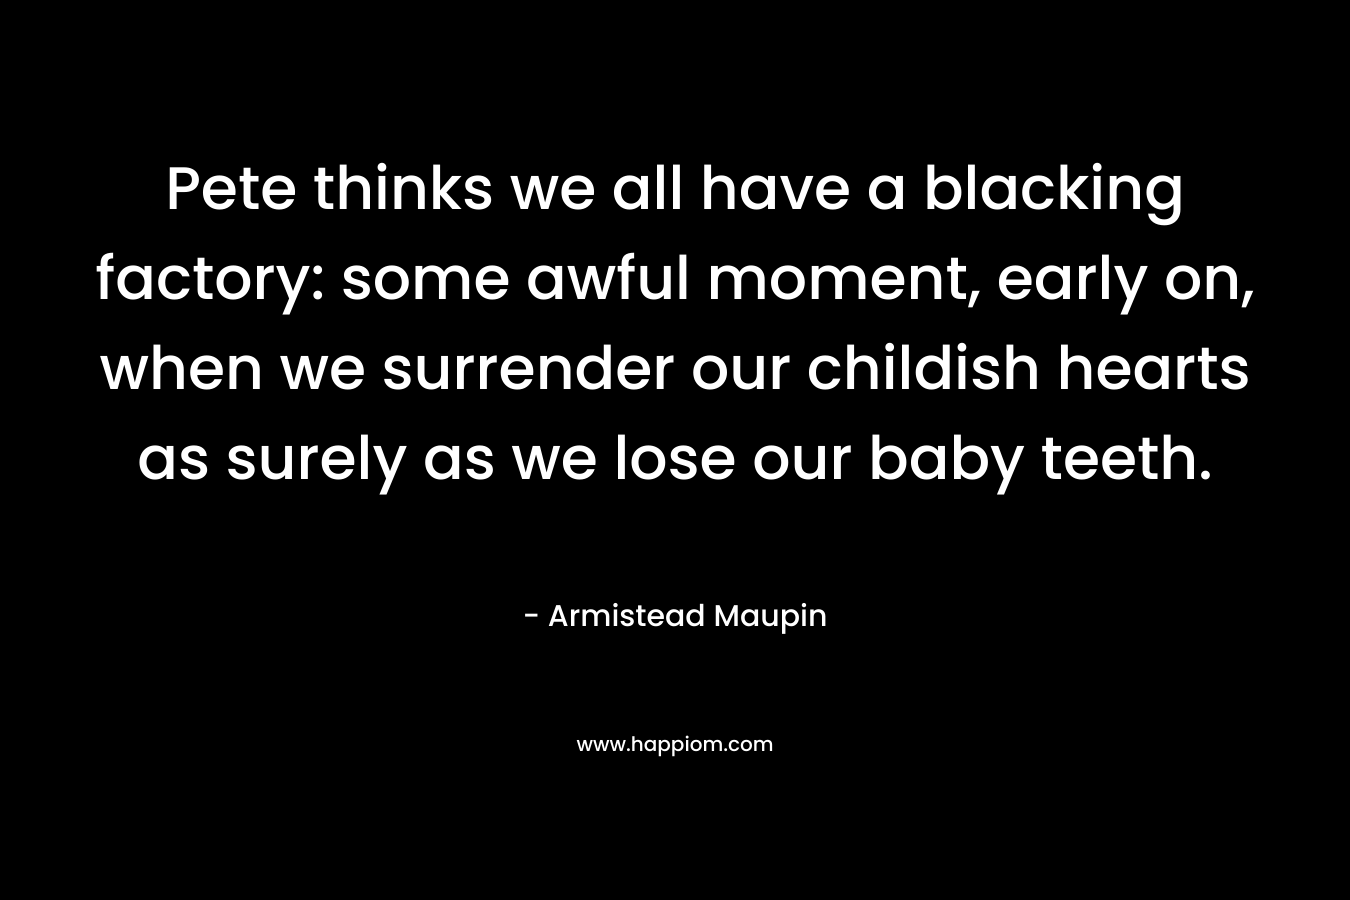 Pete thinks we all have a blacking factory: some awful moment, early on, when we surrender our childish hearts as surely as we lose our baby teeth. – Armistead Maupin